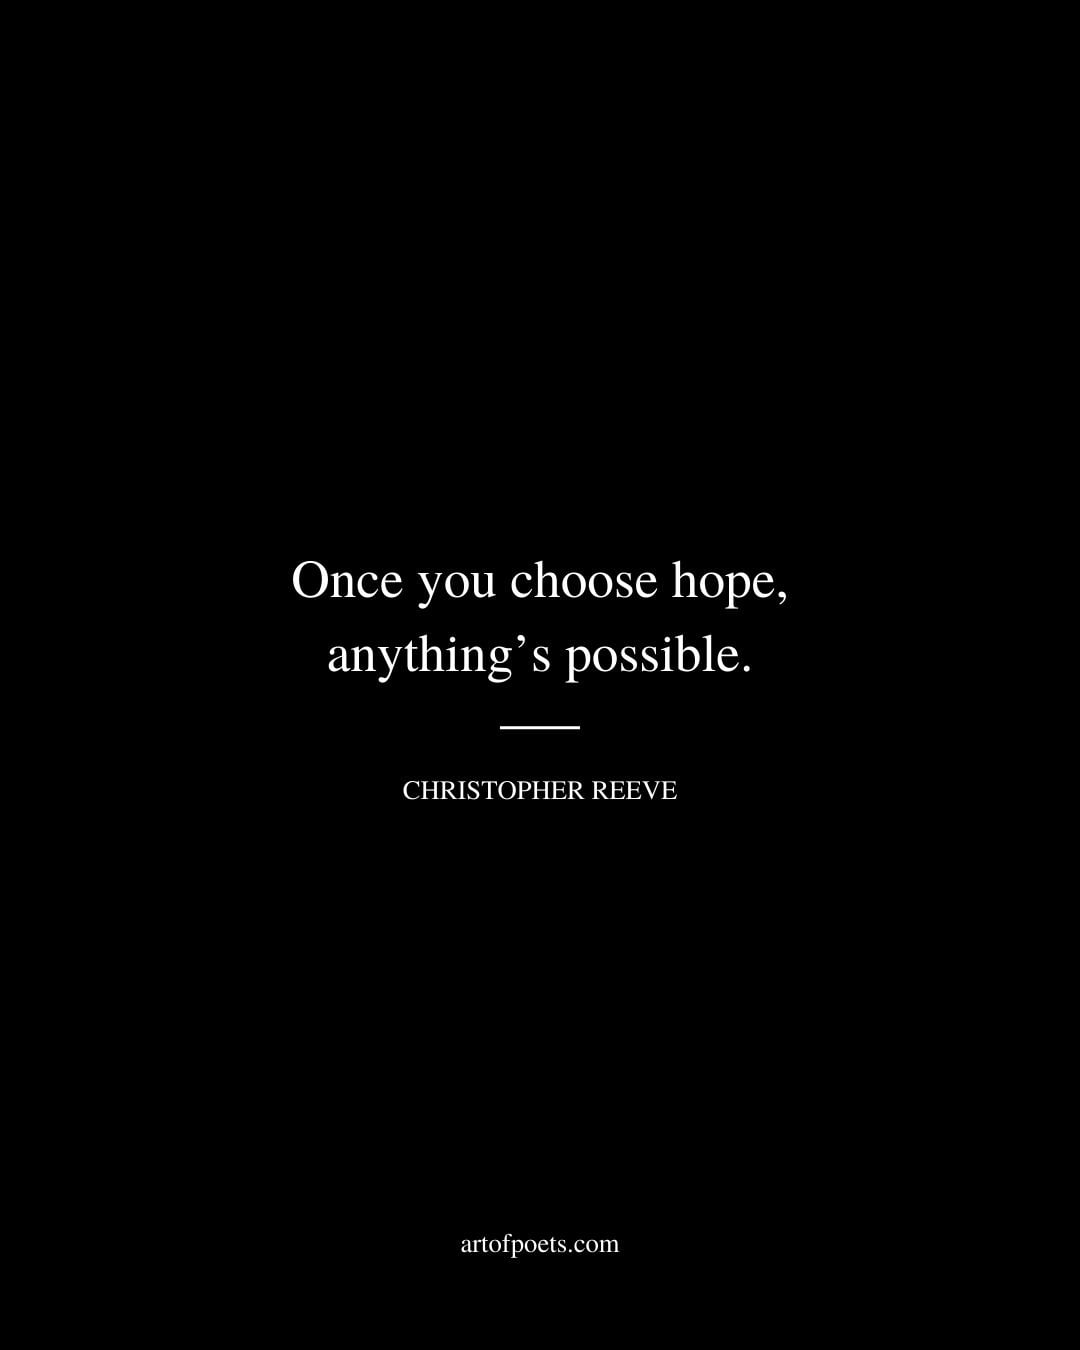 Once you choose hope anythings possible. Christopher Reeve